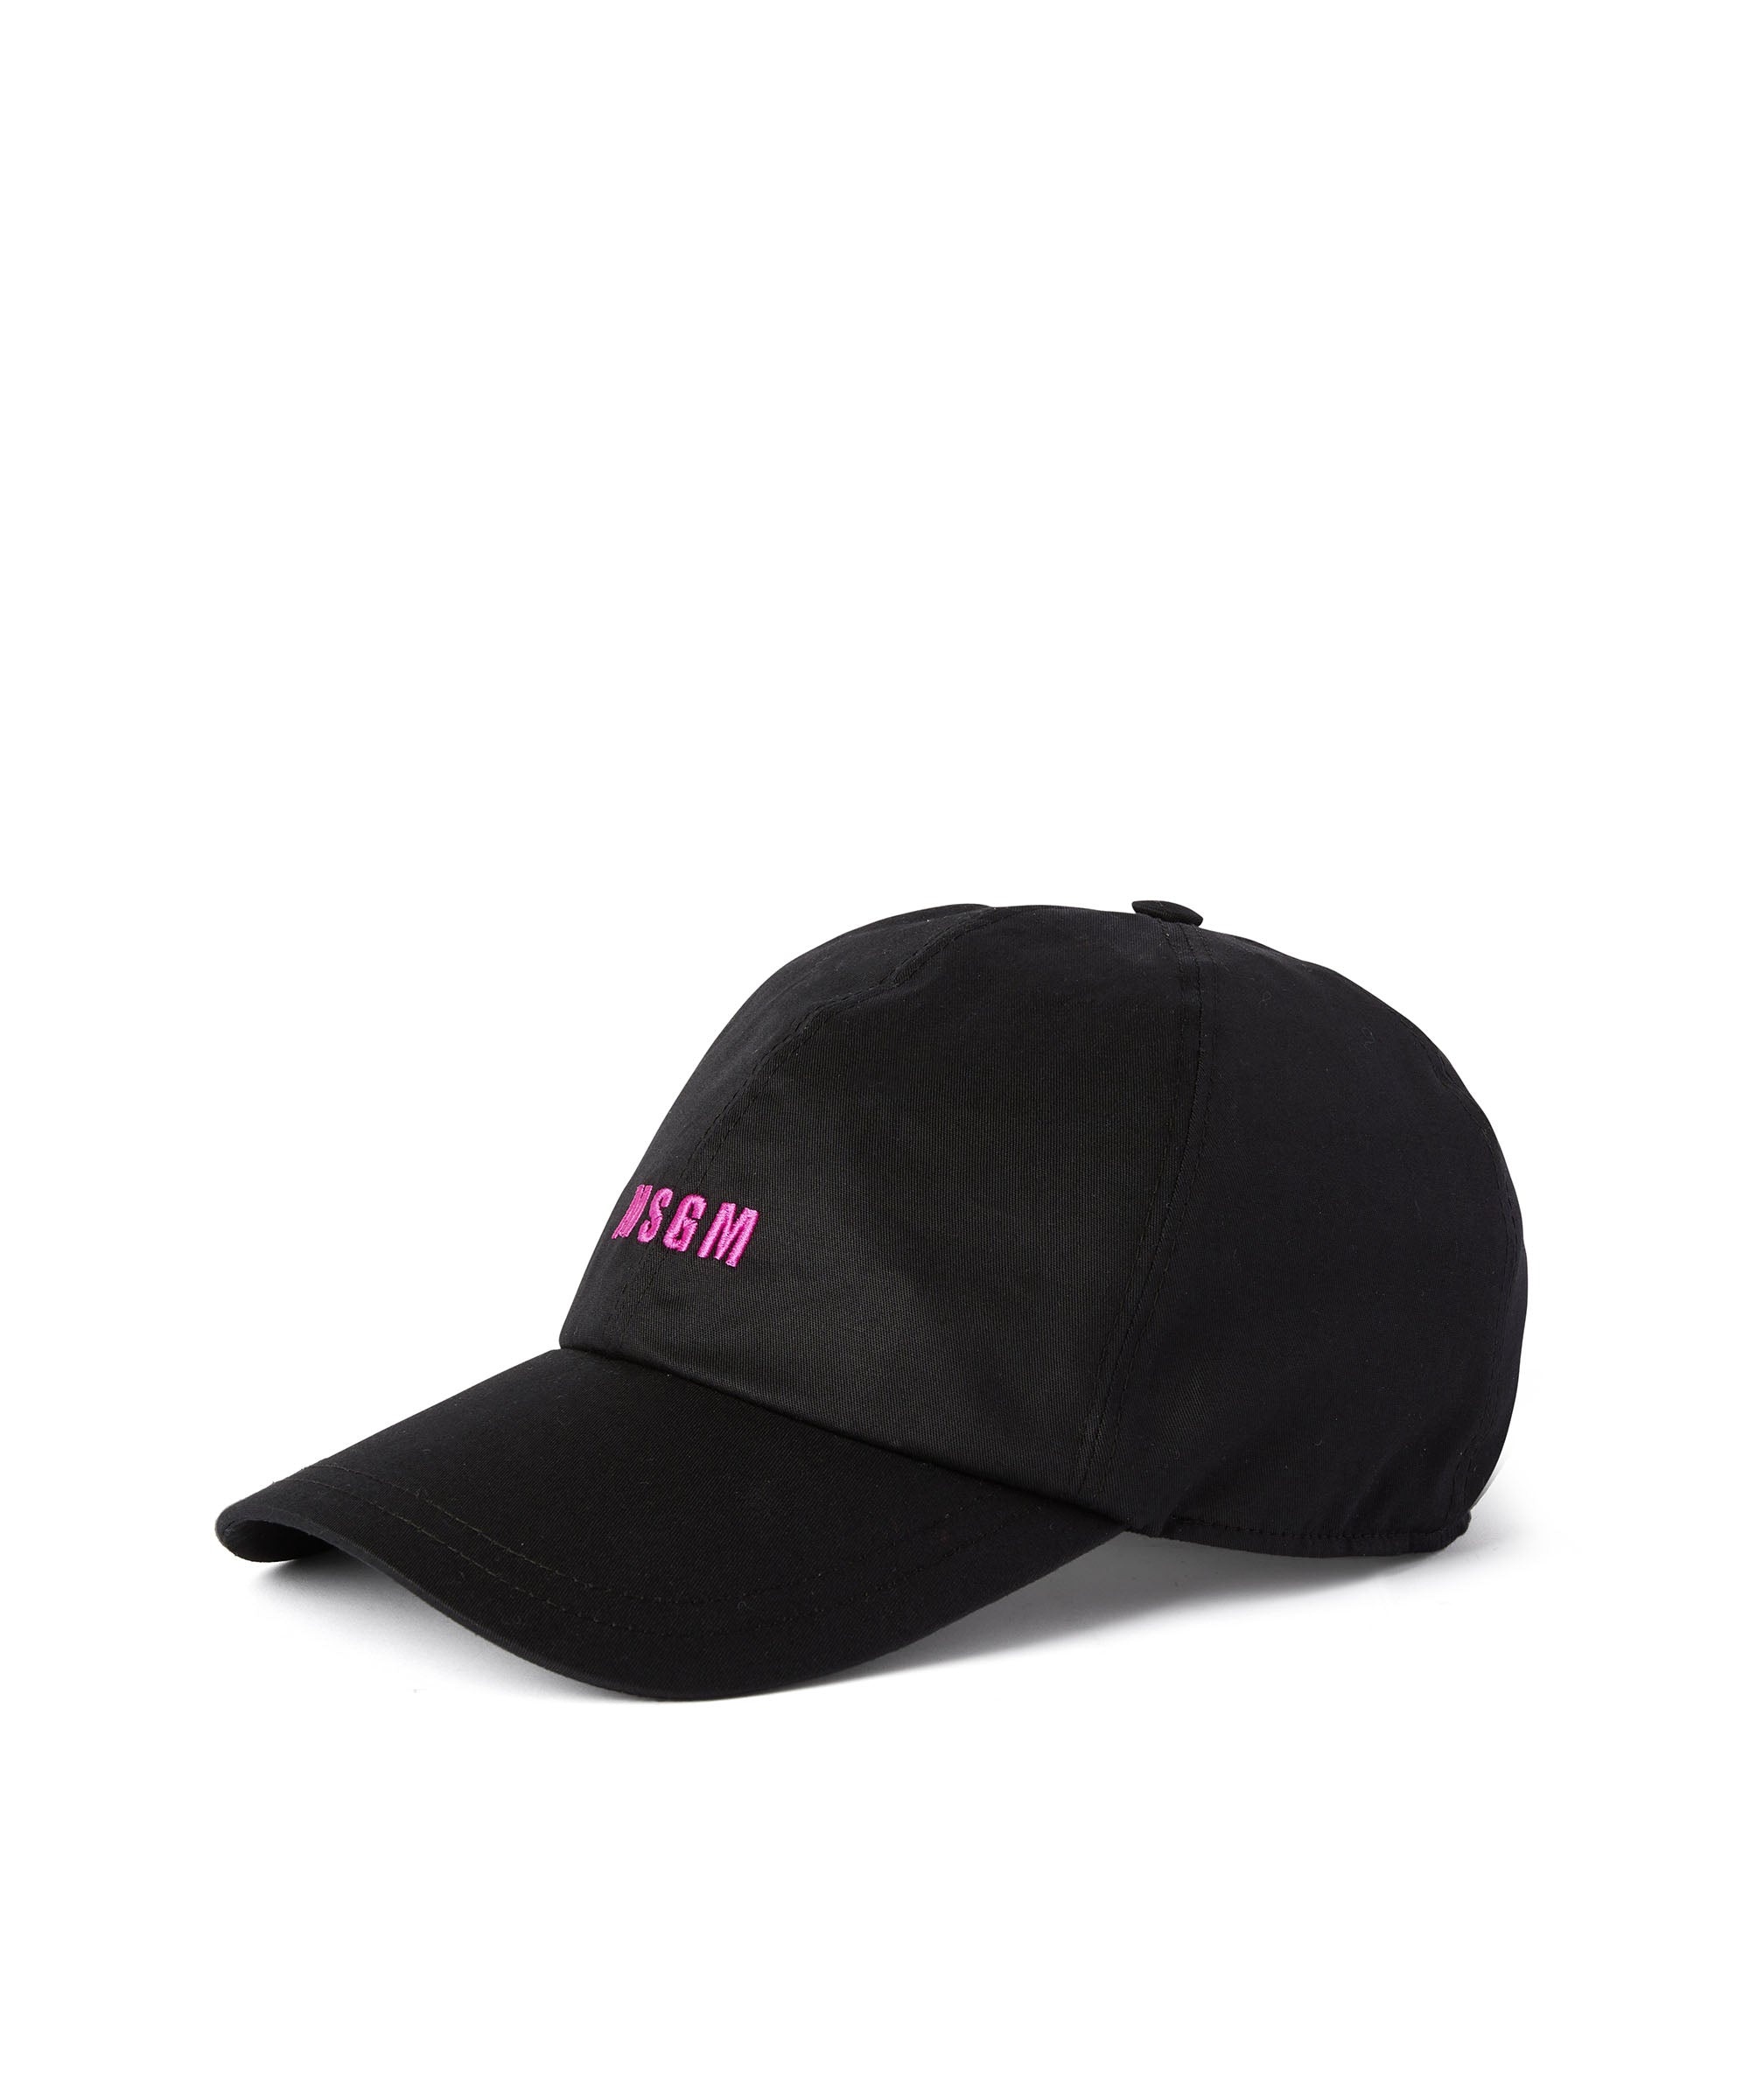 Cotton baseball cap with embroidered micro logo - 1